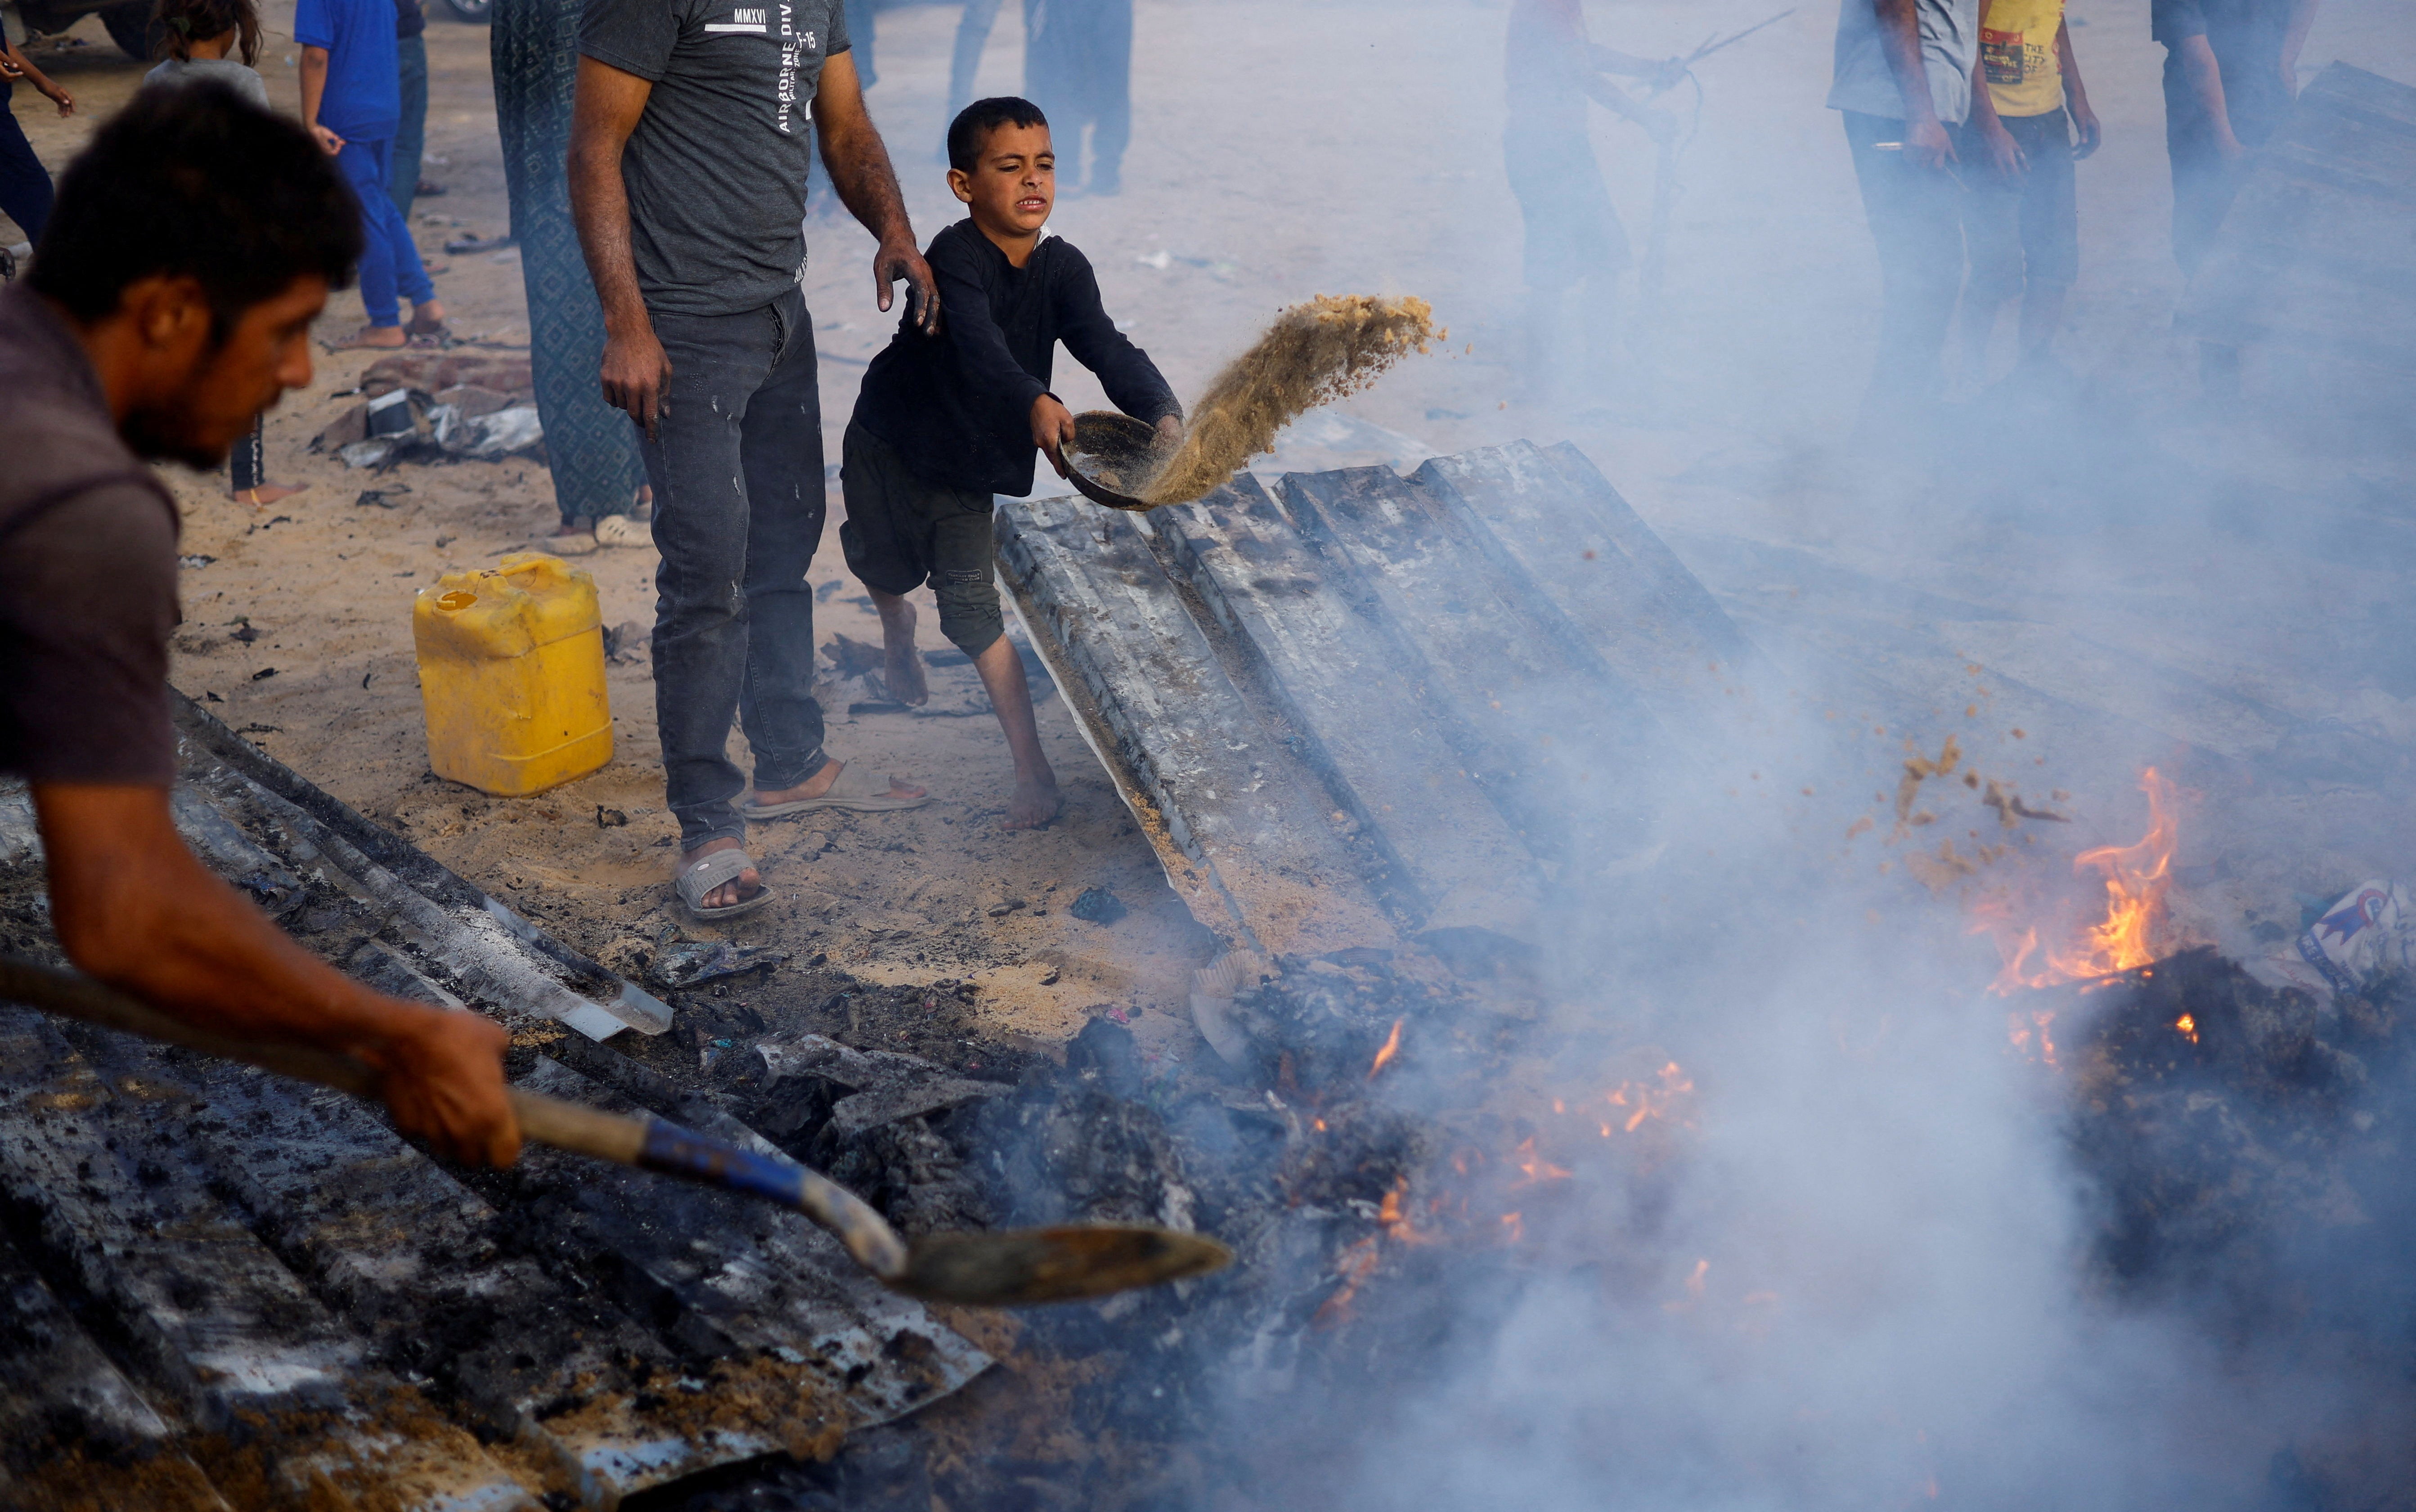 Palestinians put out a fire at the site of an Israeli strike on an area designated for displaced people in Rafah